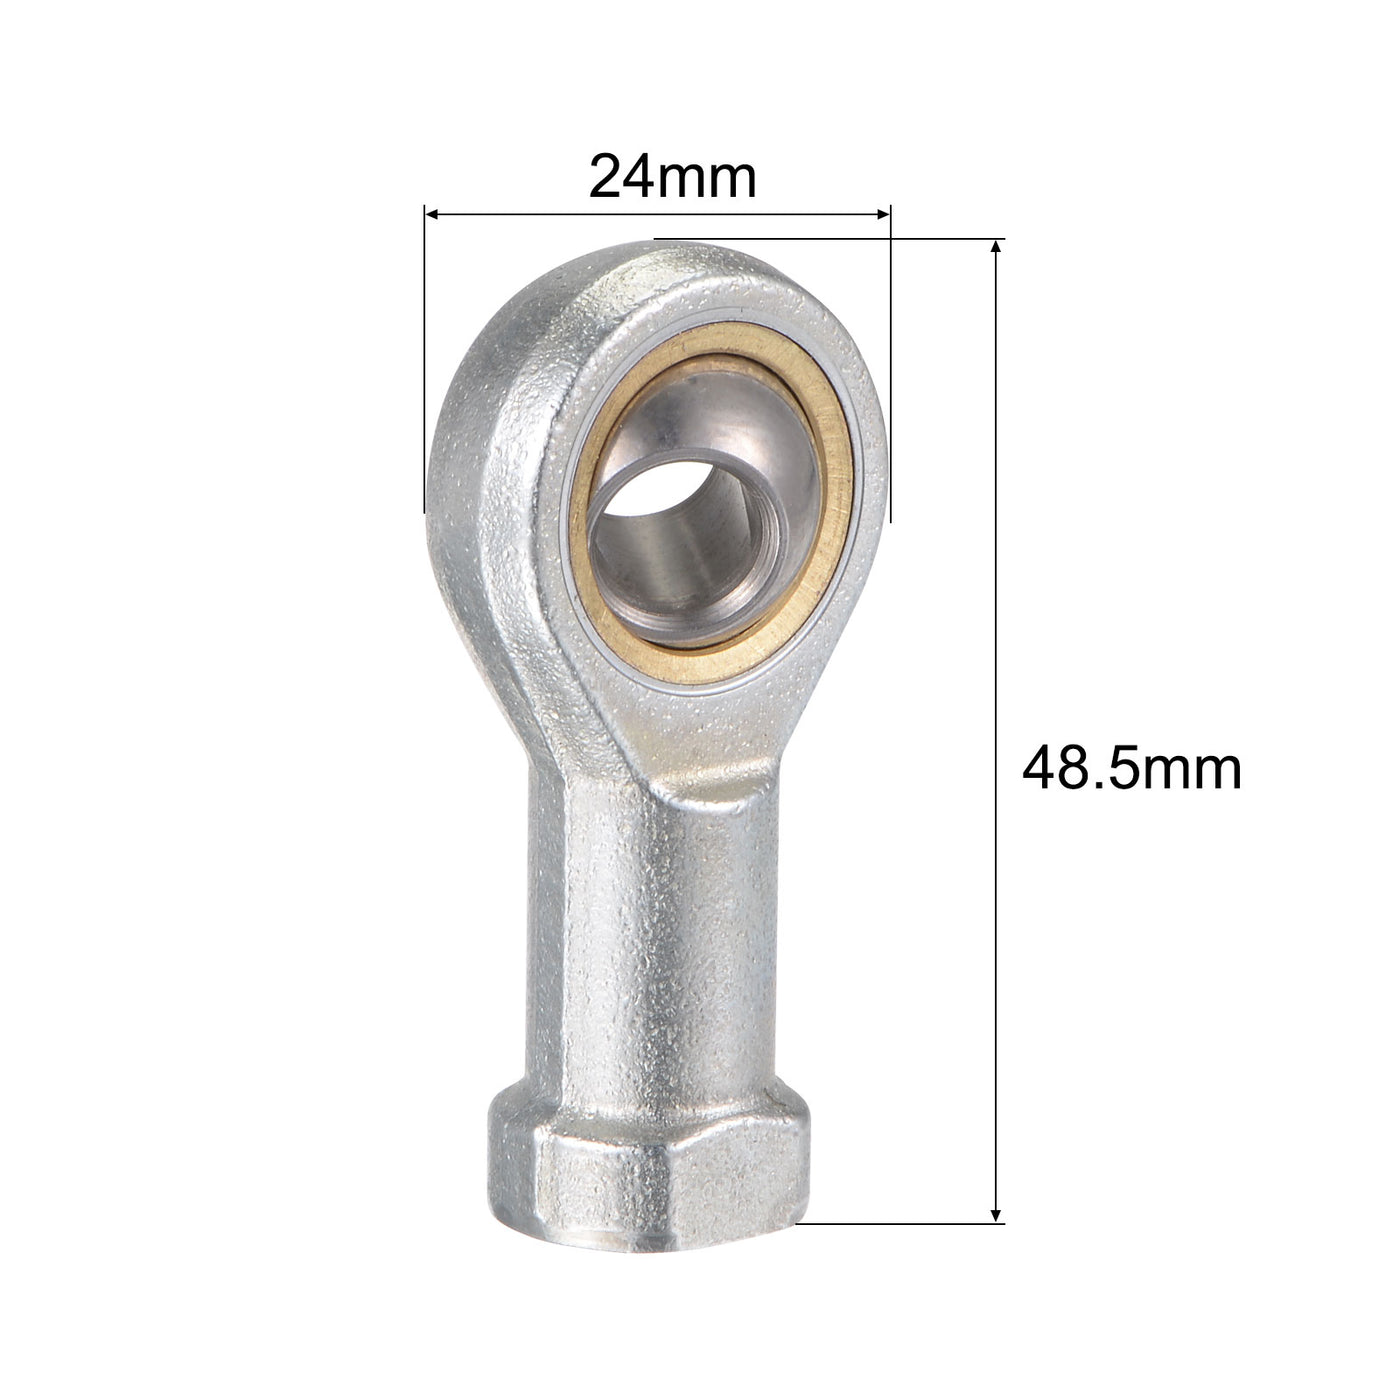 uxcell Uxcell SI8TK PHSA8 Rod End Bearing 8mm Bore M8x1.25 Right Hand Female Thread